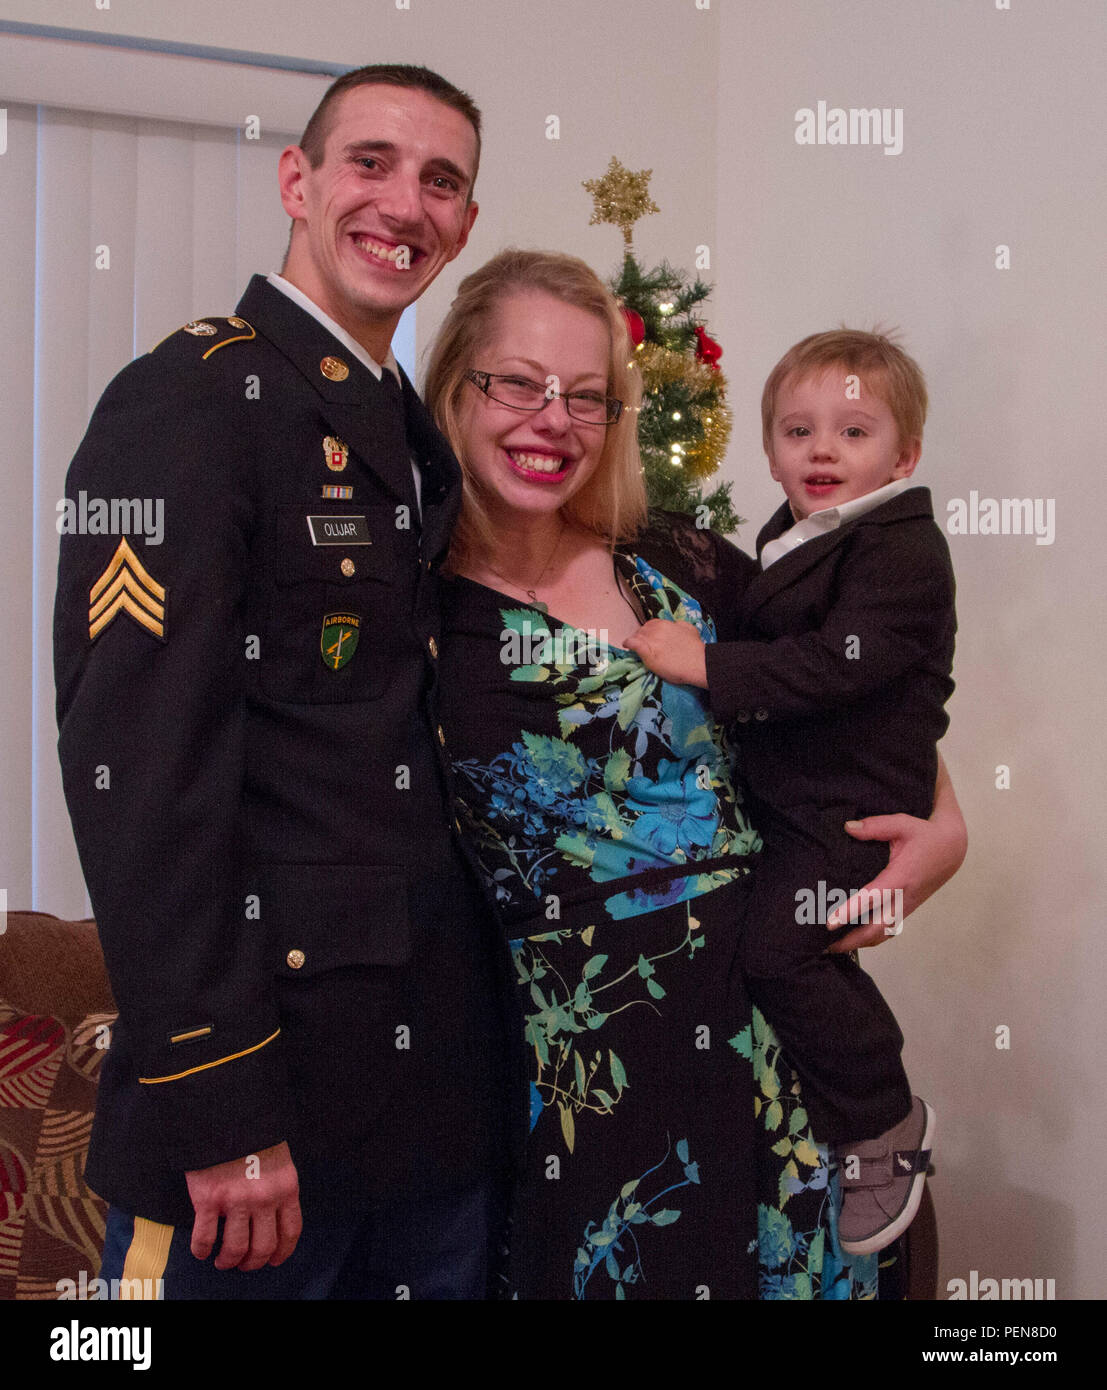 Sgt. Scott Olijar, his wife, Jennifer, and their son pose in front of their Christmas tree at their donated condominium on December 23, 2015. Through a partnership with the Illinois Housing Development Authority (IHDA) and the city of Berwyn, the Olijars received a fully furnished, permanent new home. (U.S. Army photo by Sgt. Elizabeth Barlow/Released) Stock Photo